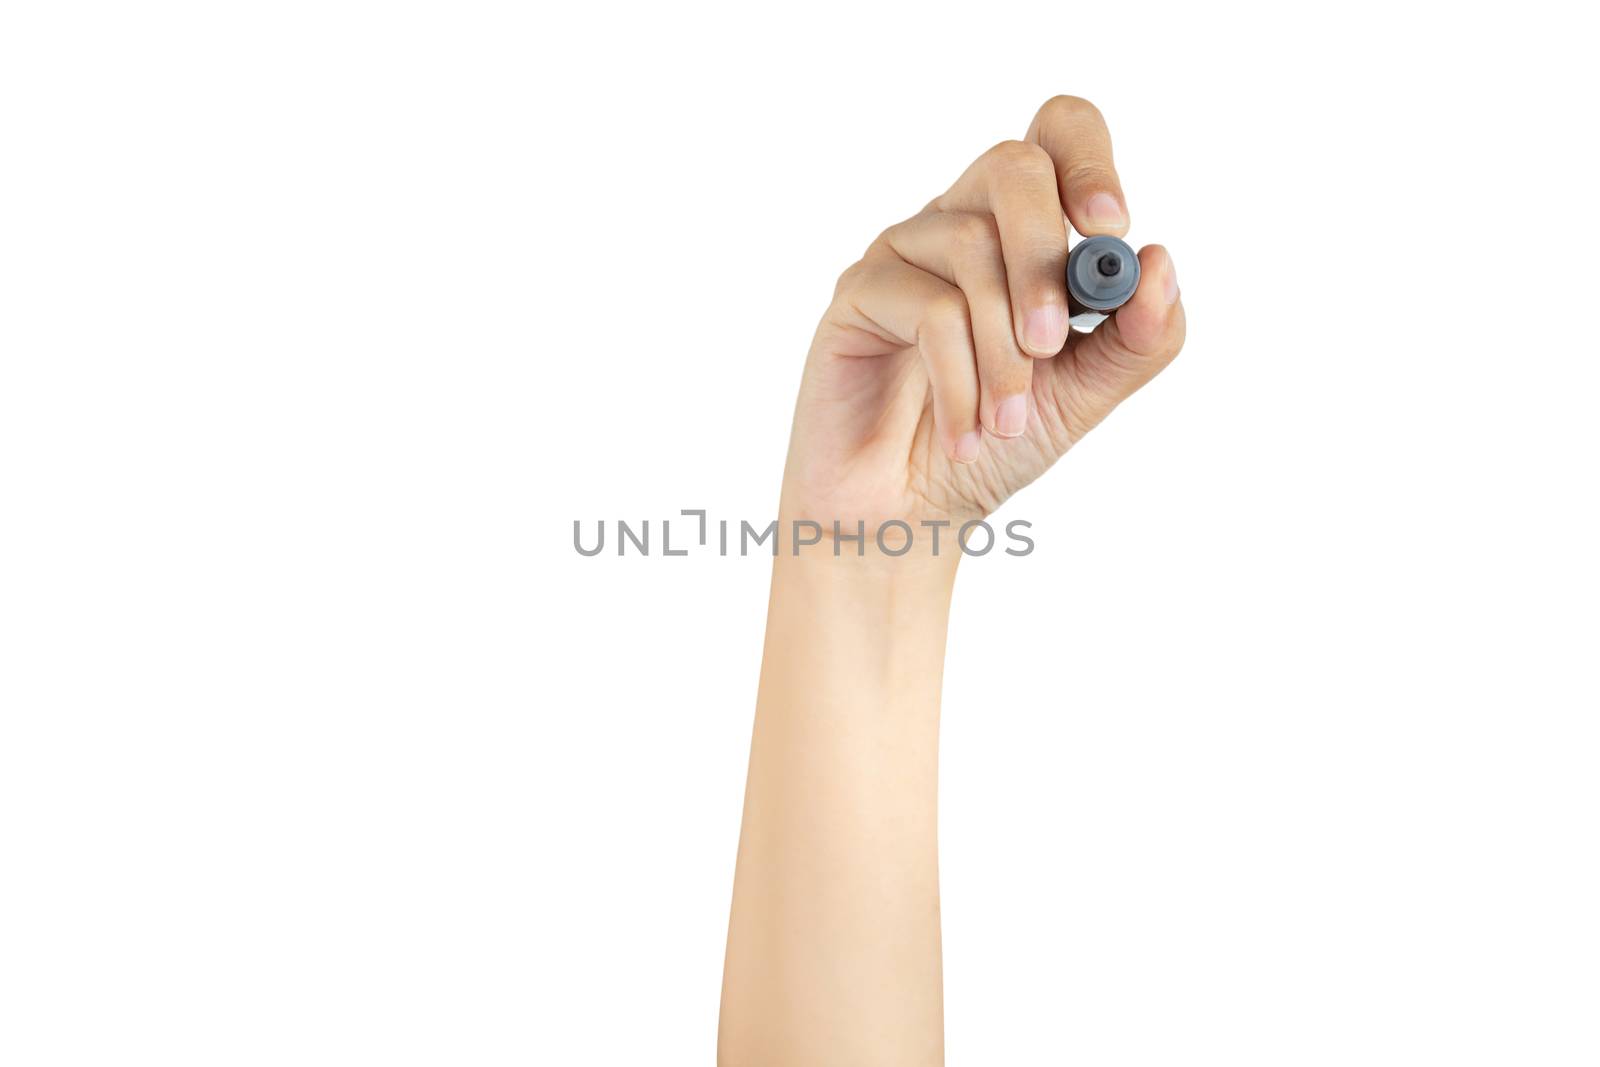 hand holding black magic marker pen ready to writing something isolated on white background with copy space, studio shot, front view by asiandelight